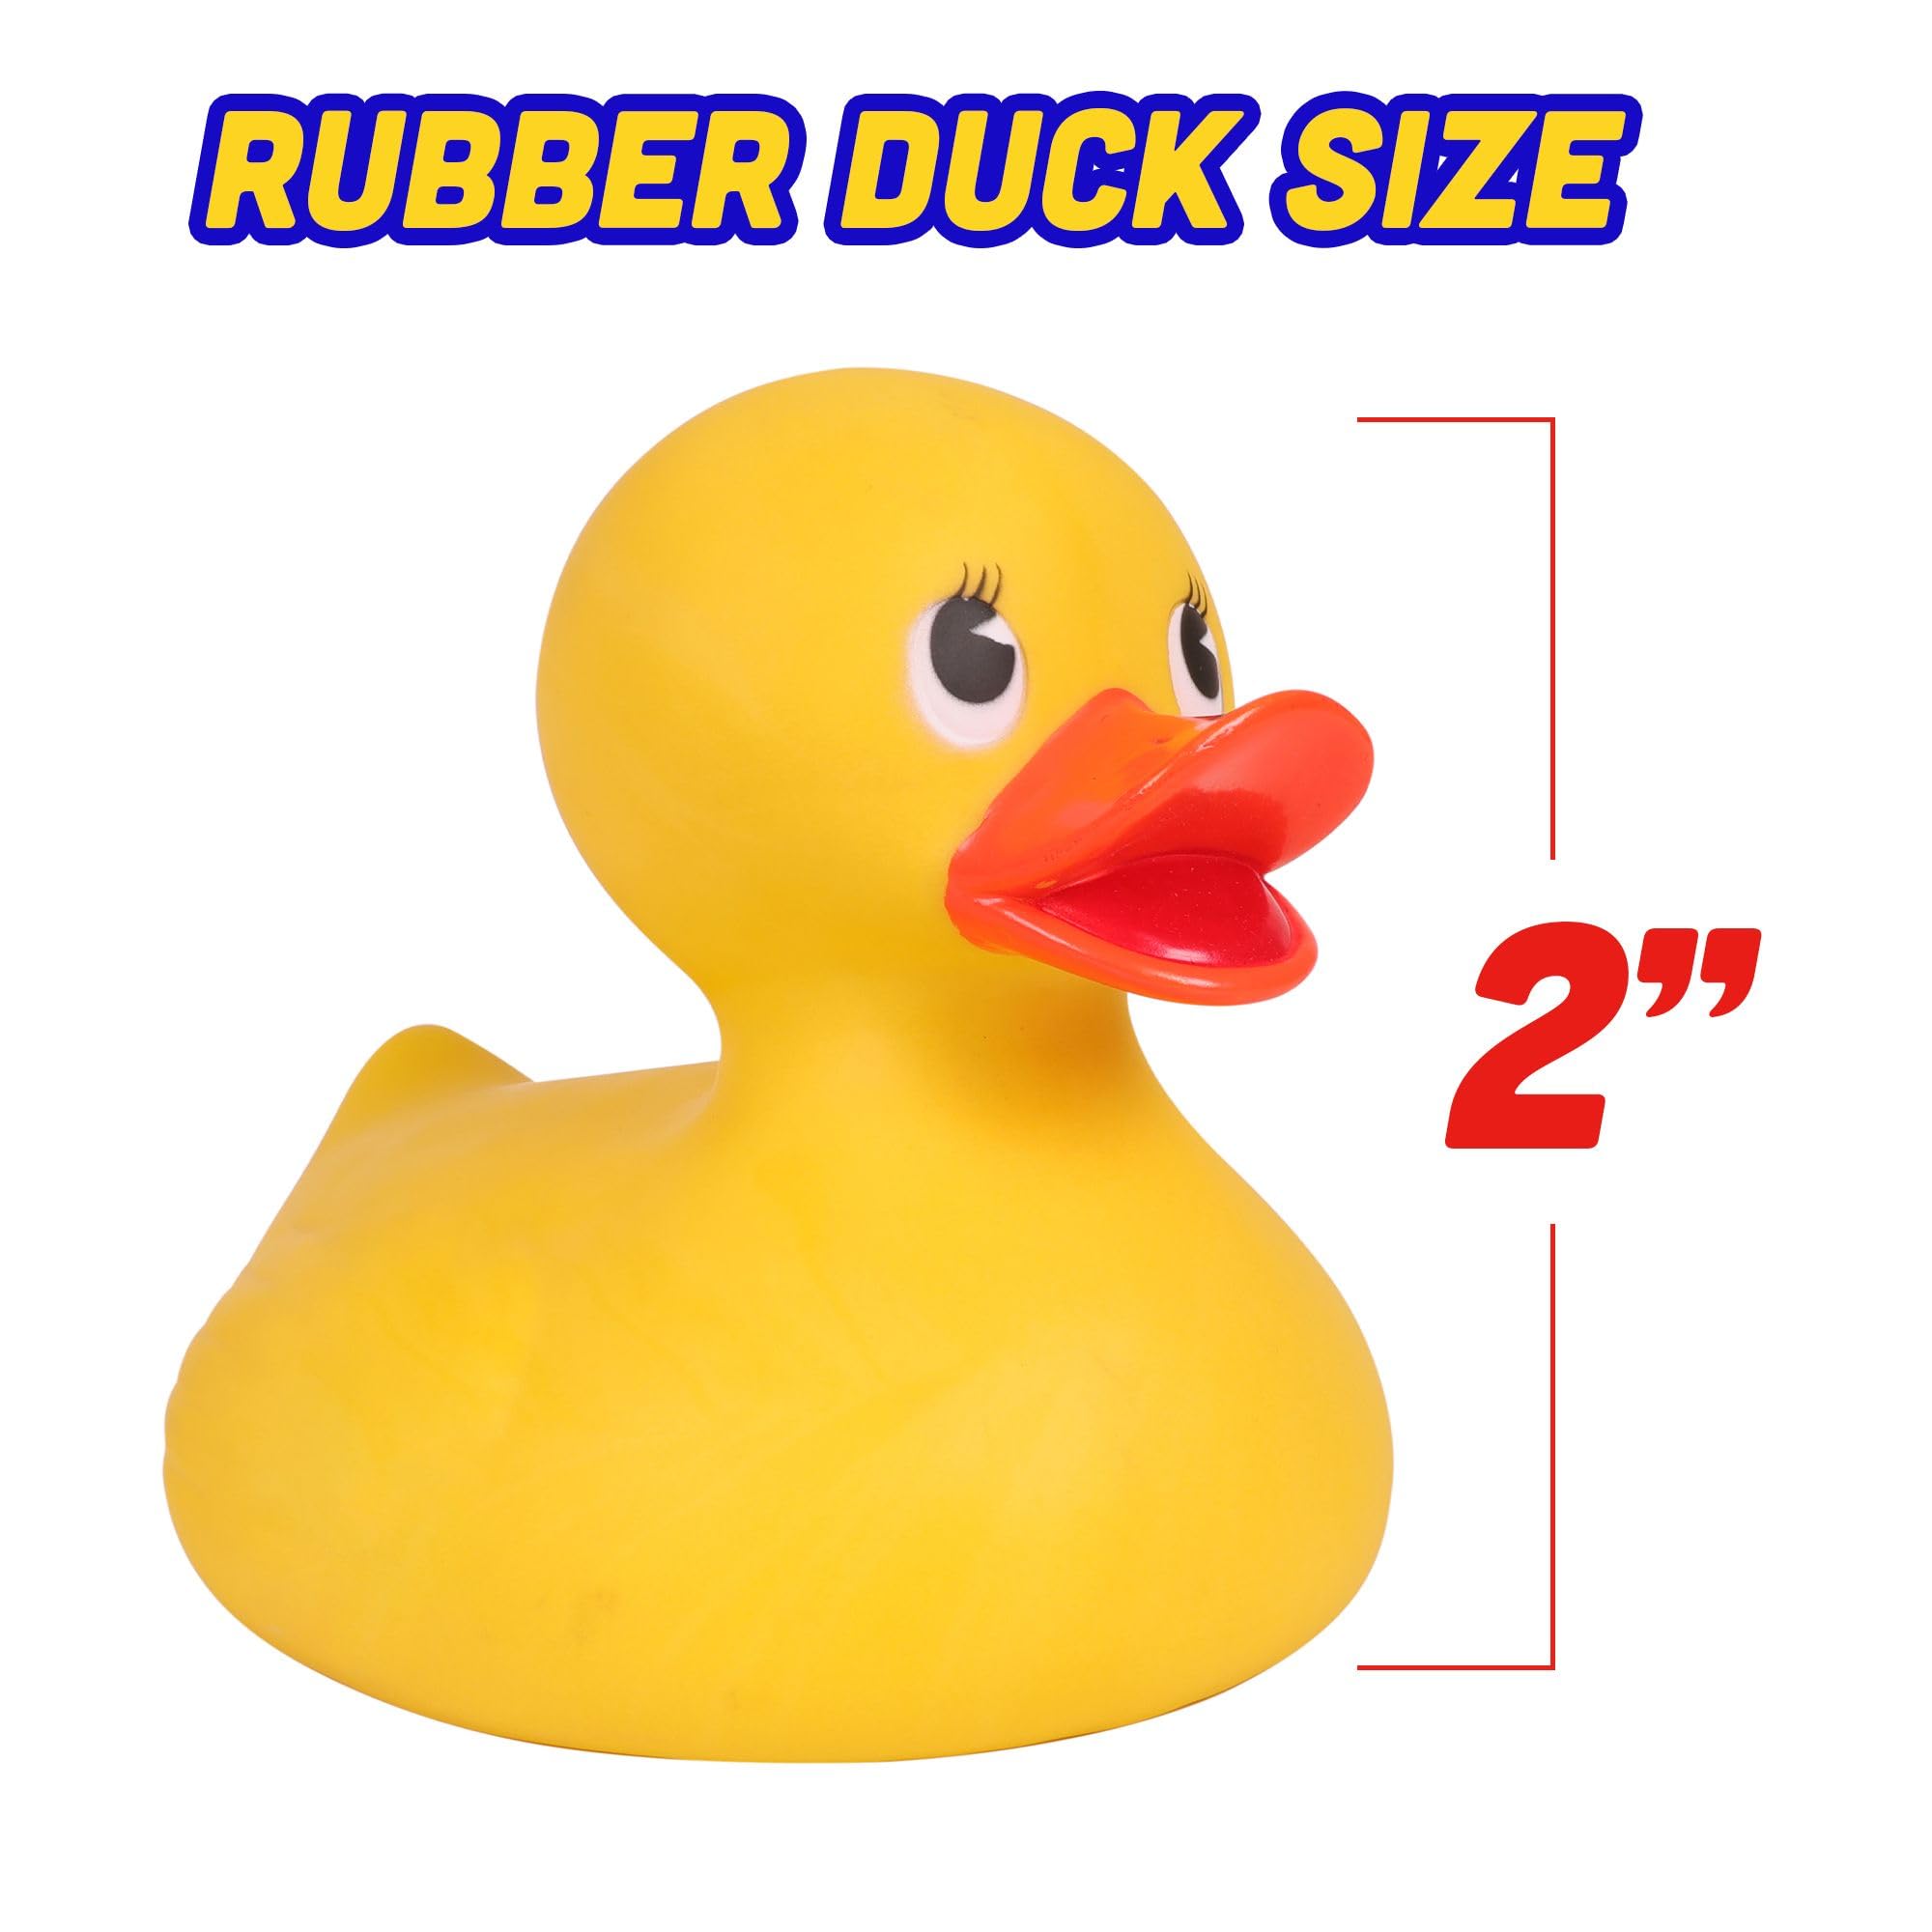 100-Pack Assorted Rubber Ducks Baby Bath Toys I Baby Shower Mini Rubber Ducks In Bulk I Baby Pool Jeep Ducks for Toddler Party Favors I Kid Infant Bathtub Toys Rubber Duckies I Baby pool Birthday Gift